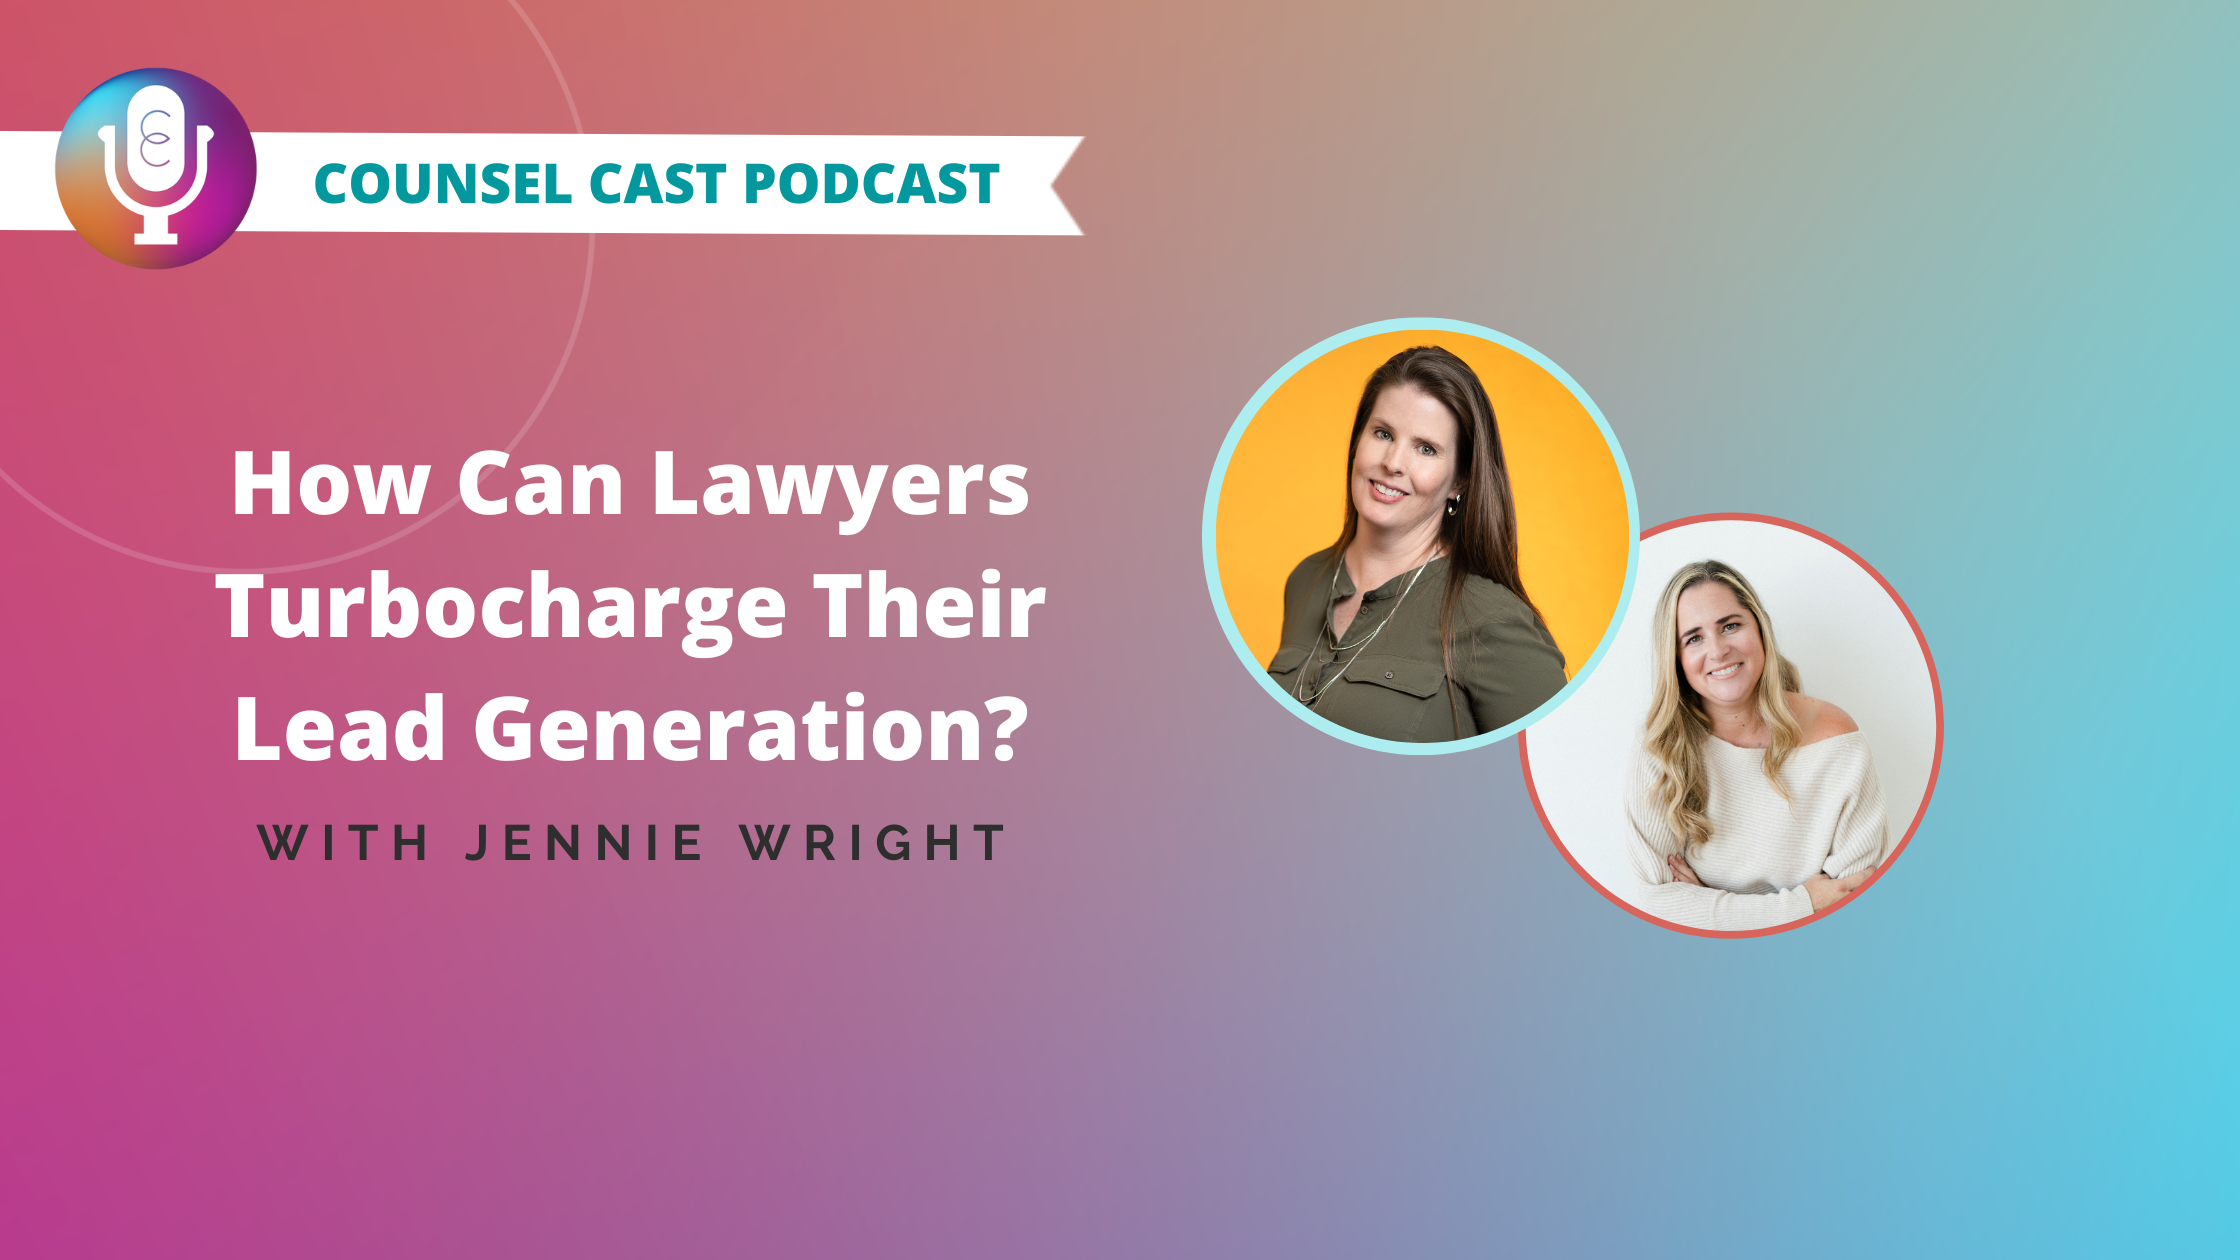 How Can Lawyers Turbocharge Their Lead Generation? with Jennie Wright